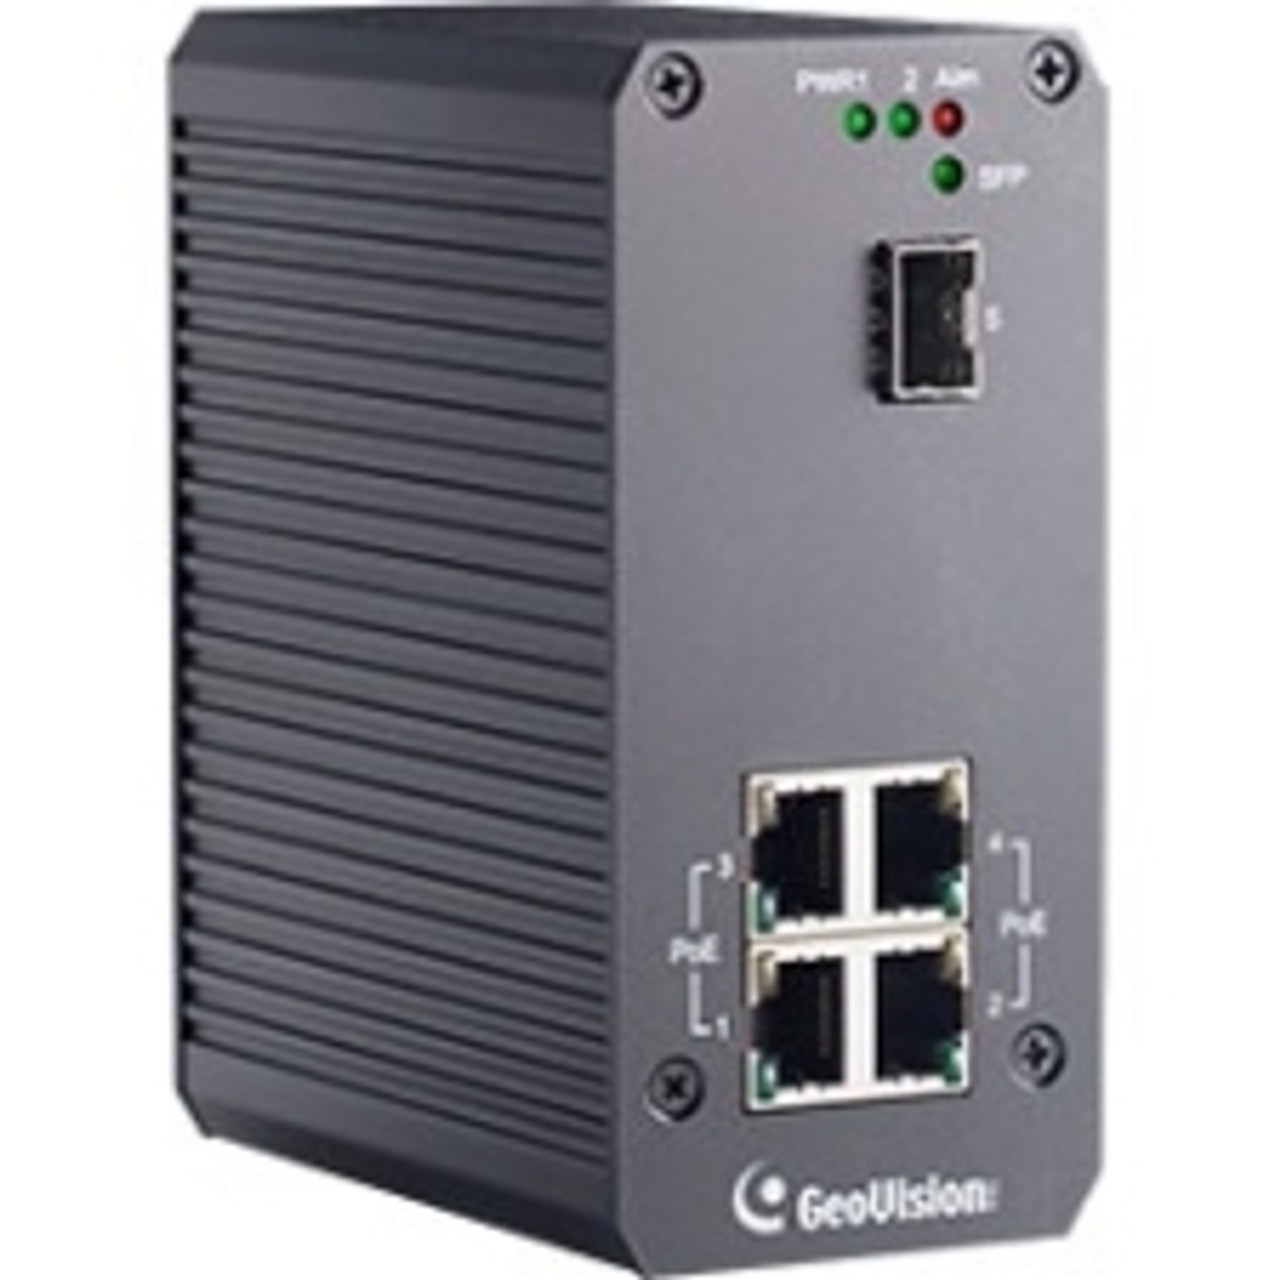 140-POE0410-E00 GeoVision GV-PoE0410-E 4-port Gigabit 802.3at PoE Switch 4 Network, 1 Expansion Slot Optical Fiber, Twisted Pair Modular 2 Layer Supported